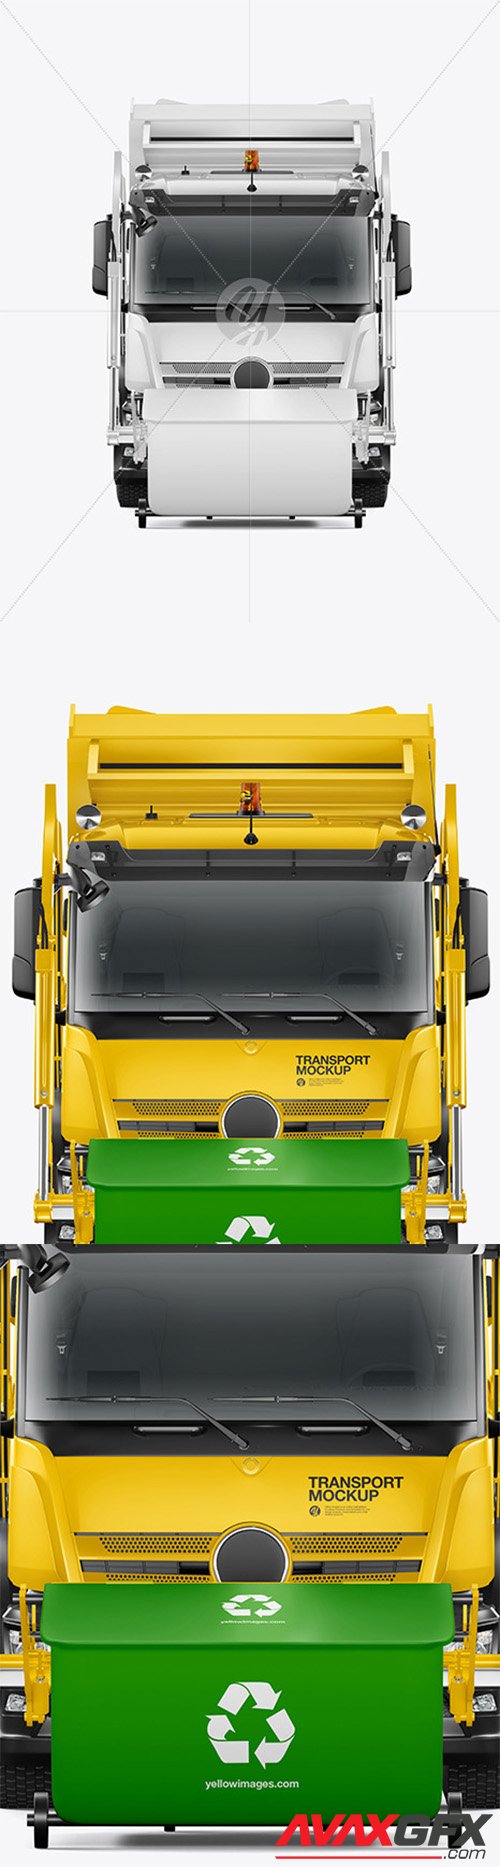 Garbage Truck Mockup - Front View 82056